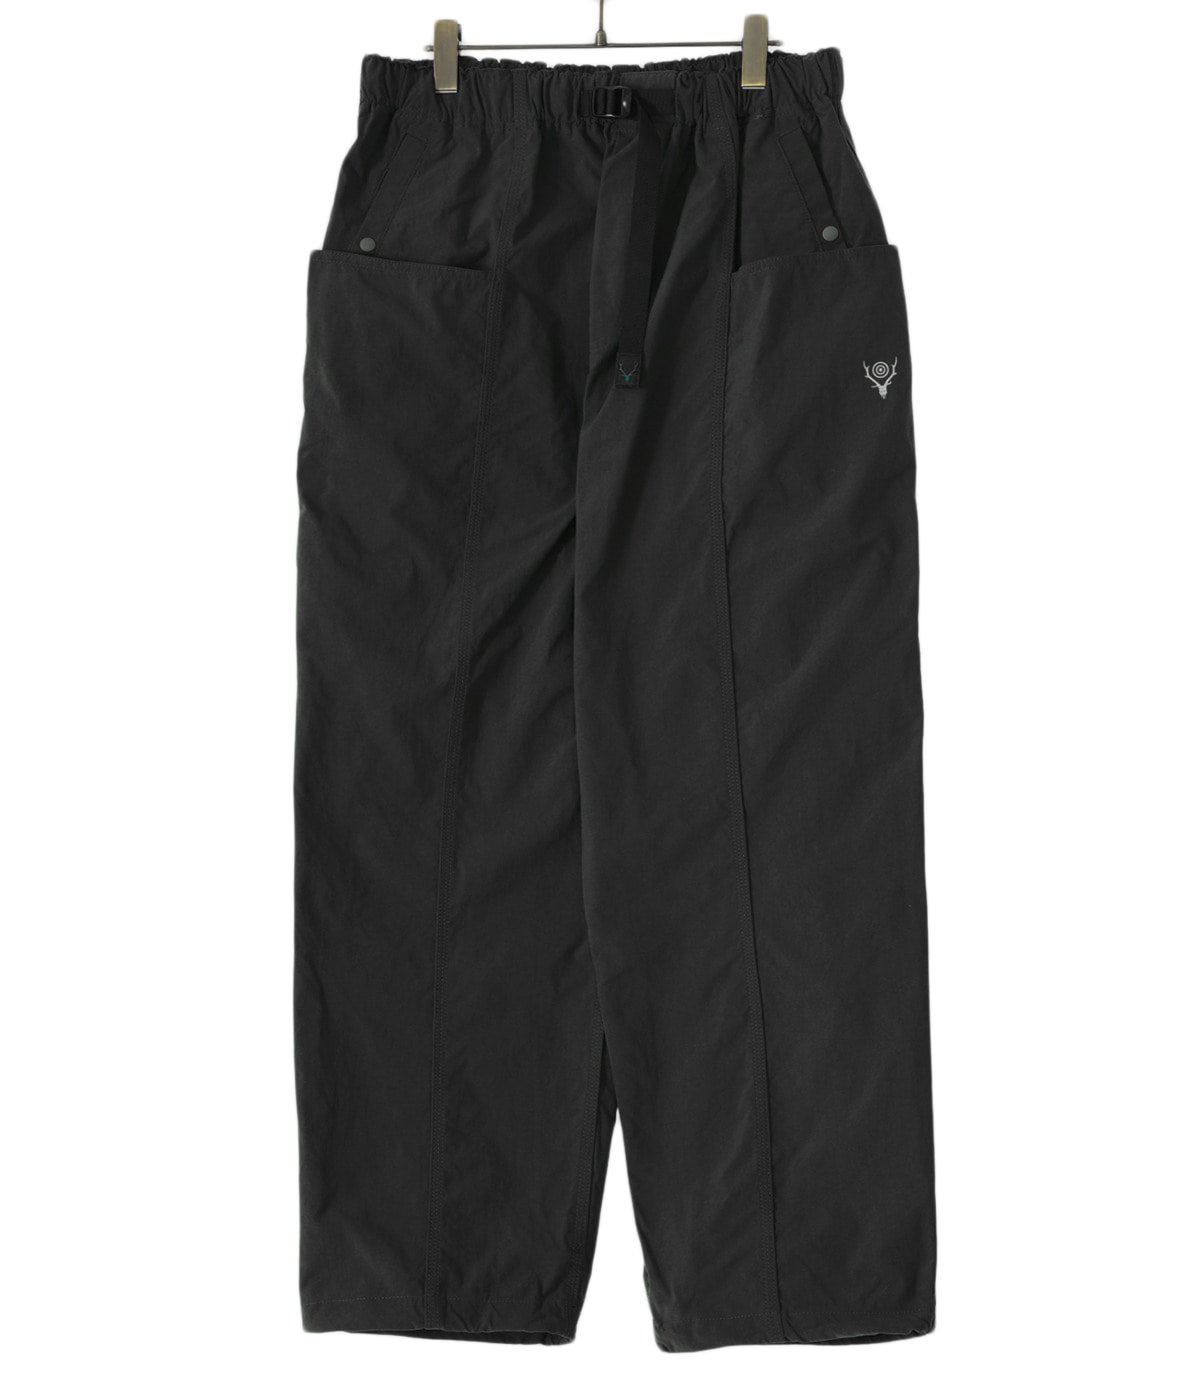 Belted C.S. Pant - Nylon Ox ford | South2 West8(サウスツーウエスト 